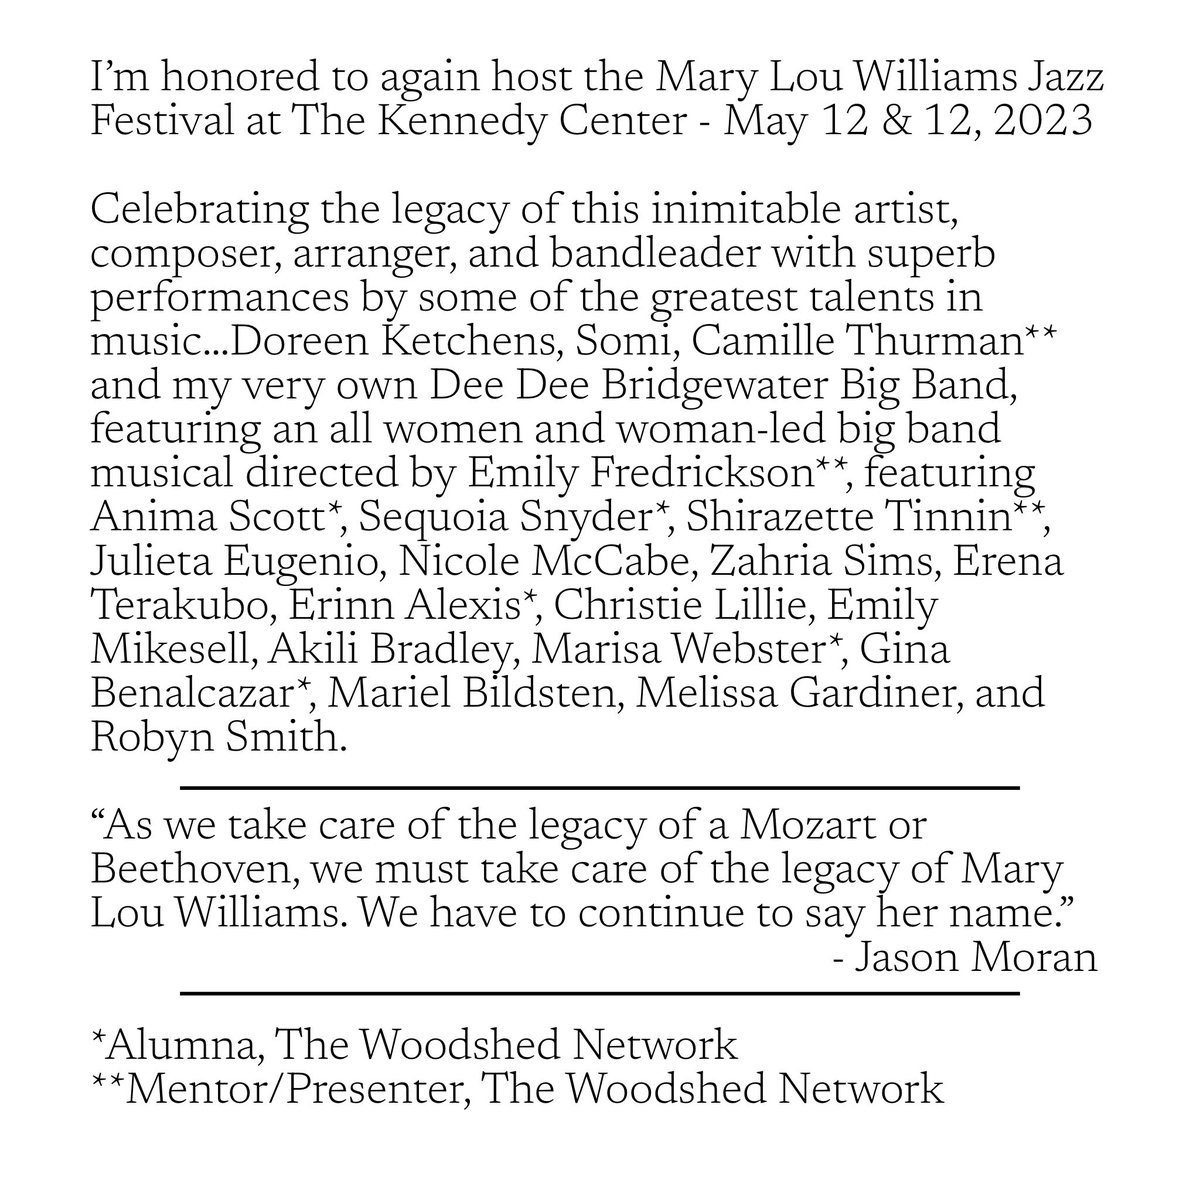 I’m honored to again host the Mary Lou Williams Jazz Festival at The Kennedy Center - May 12 & 12, 2023 @kencen Come out and hear us! #womeninjazz #womeninmusic #WashingtonDC